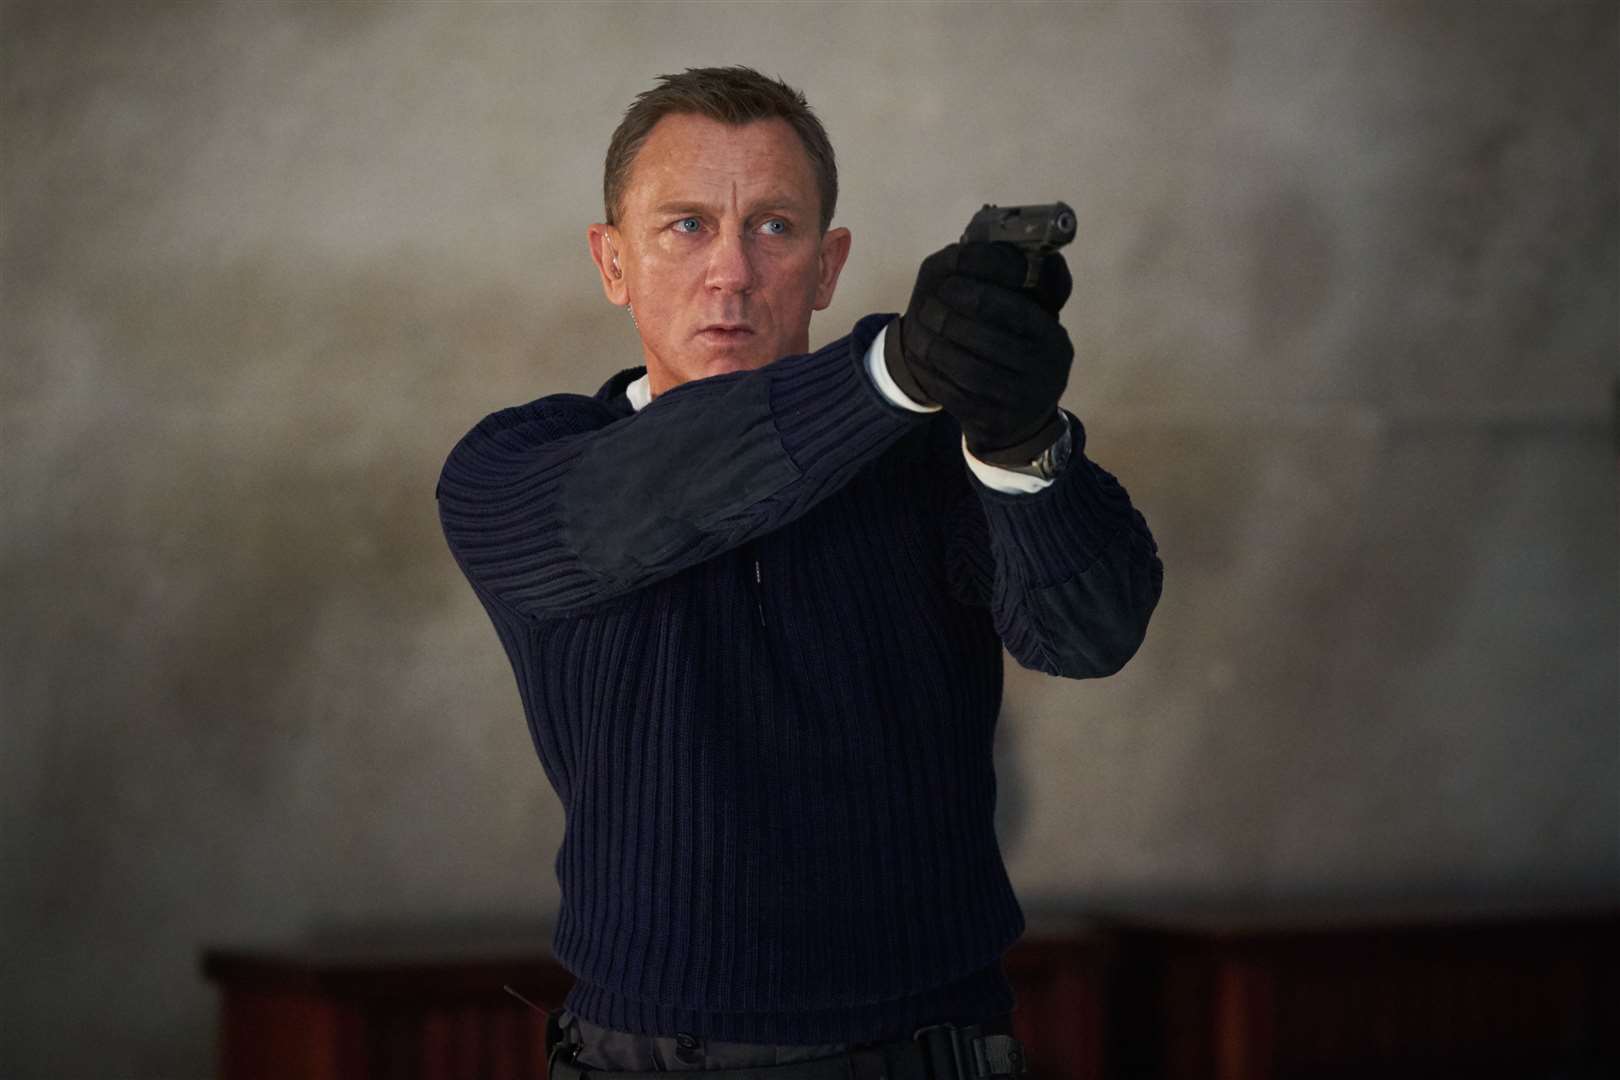 Daniel Craig playing James Bond in the delayed Bond film No Time To Die (Nicola Dove/PA)